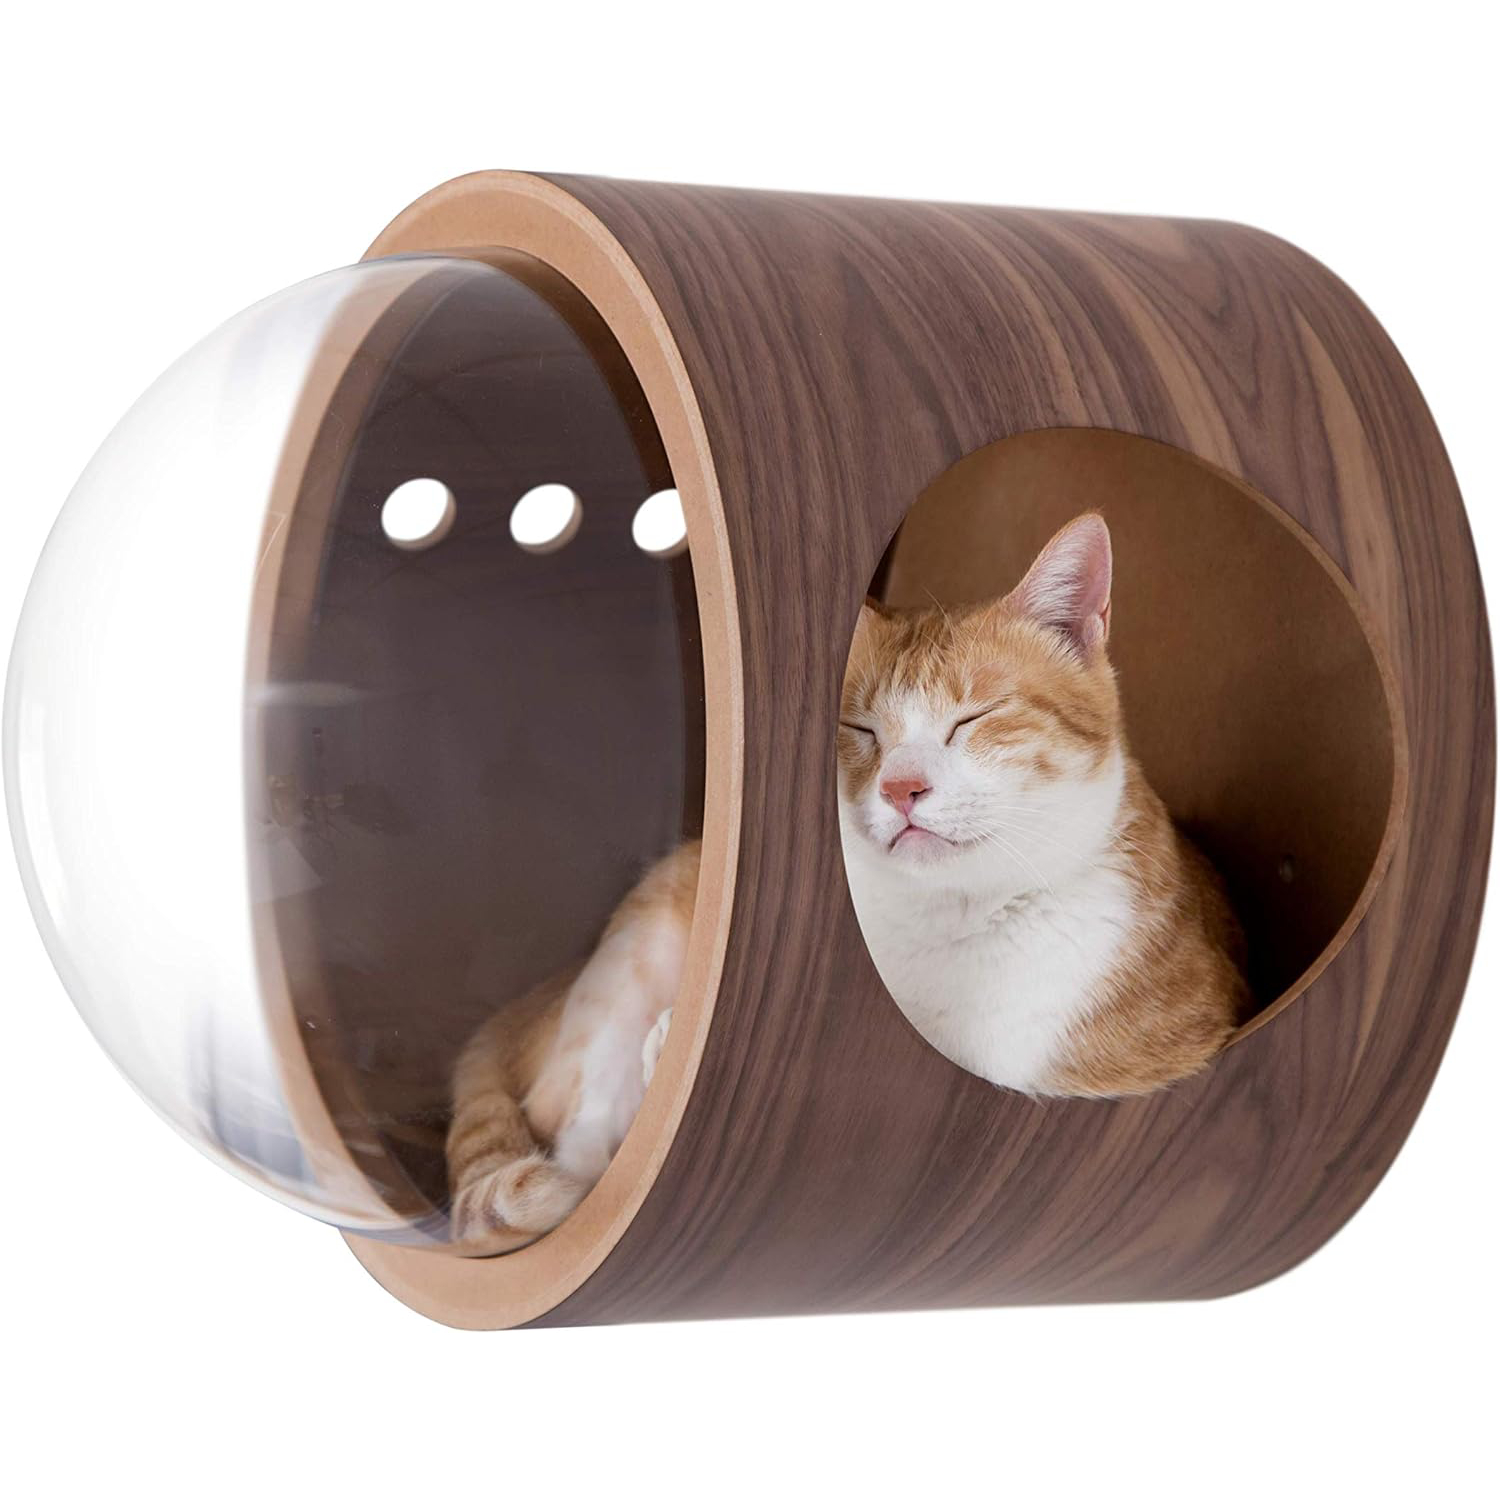 MYZOO Spaceship Gamma, Pet Bed for Cat & Dog, Window Perch, Cat Tree, Made of Wood (Walnut, Open Right) New